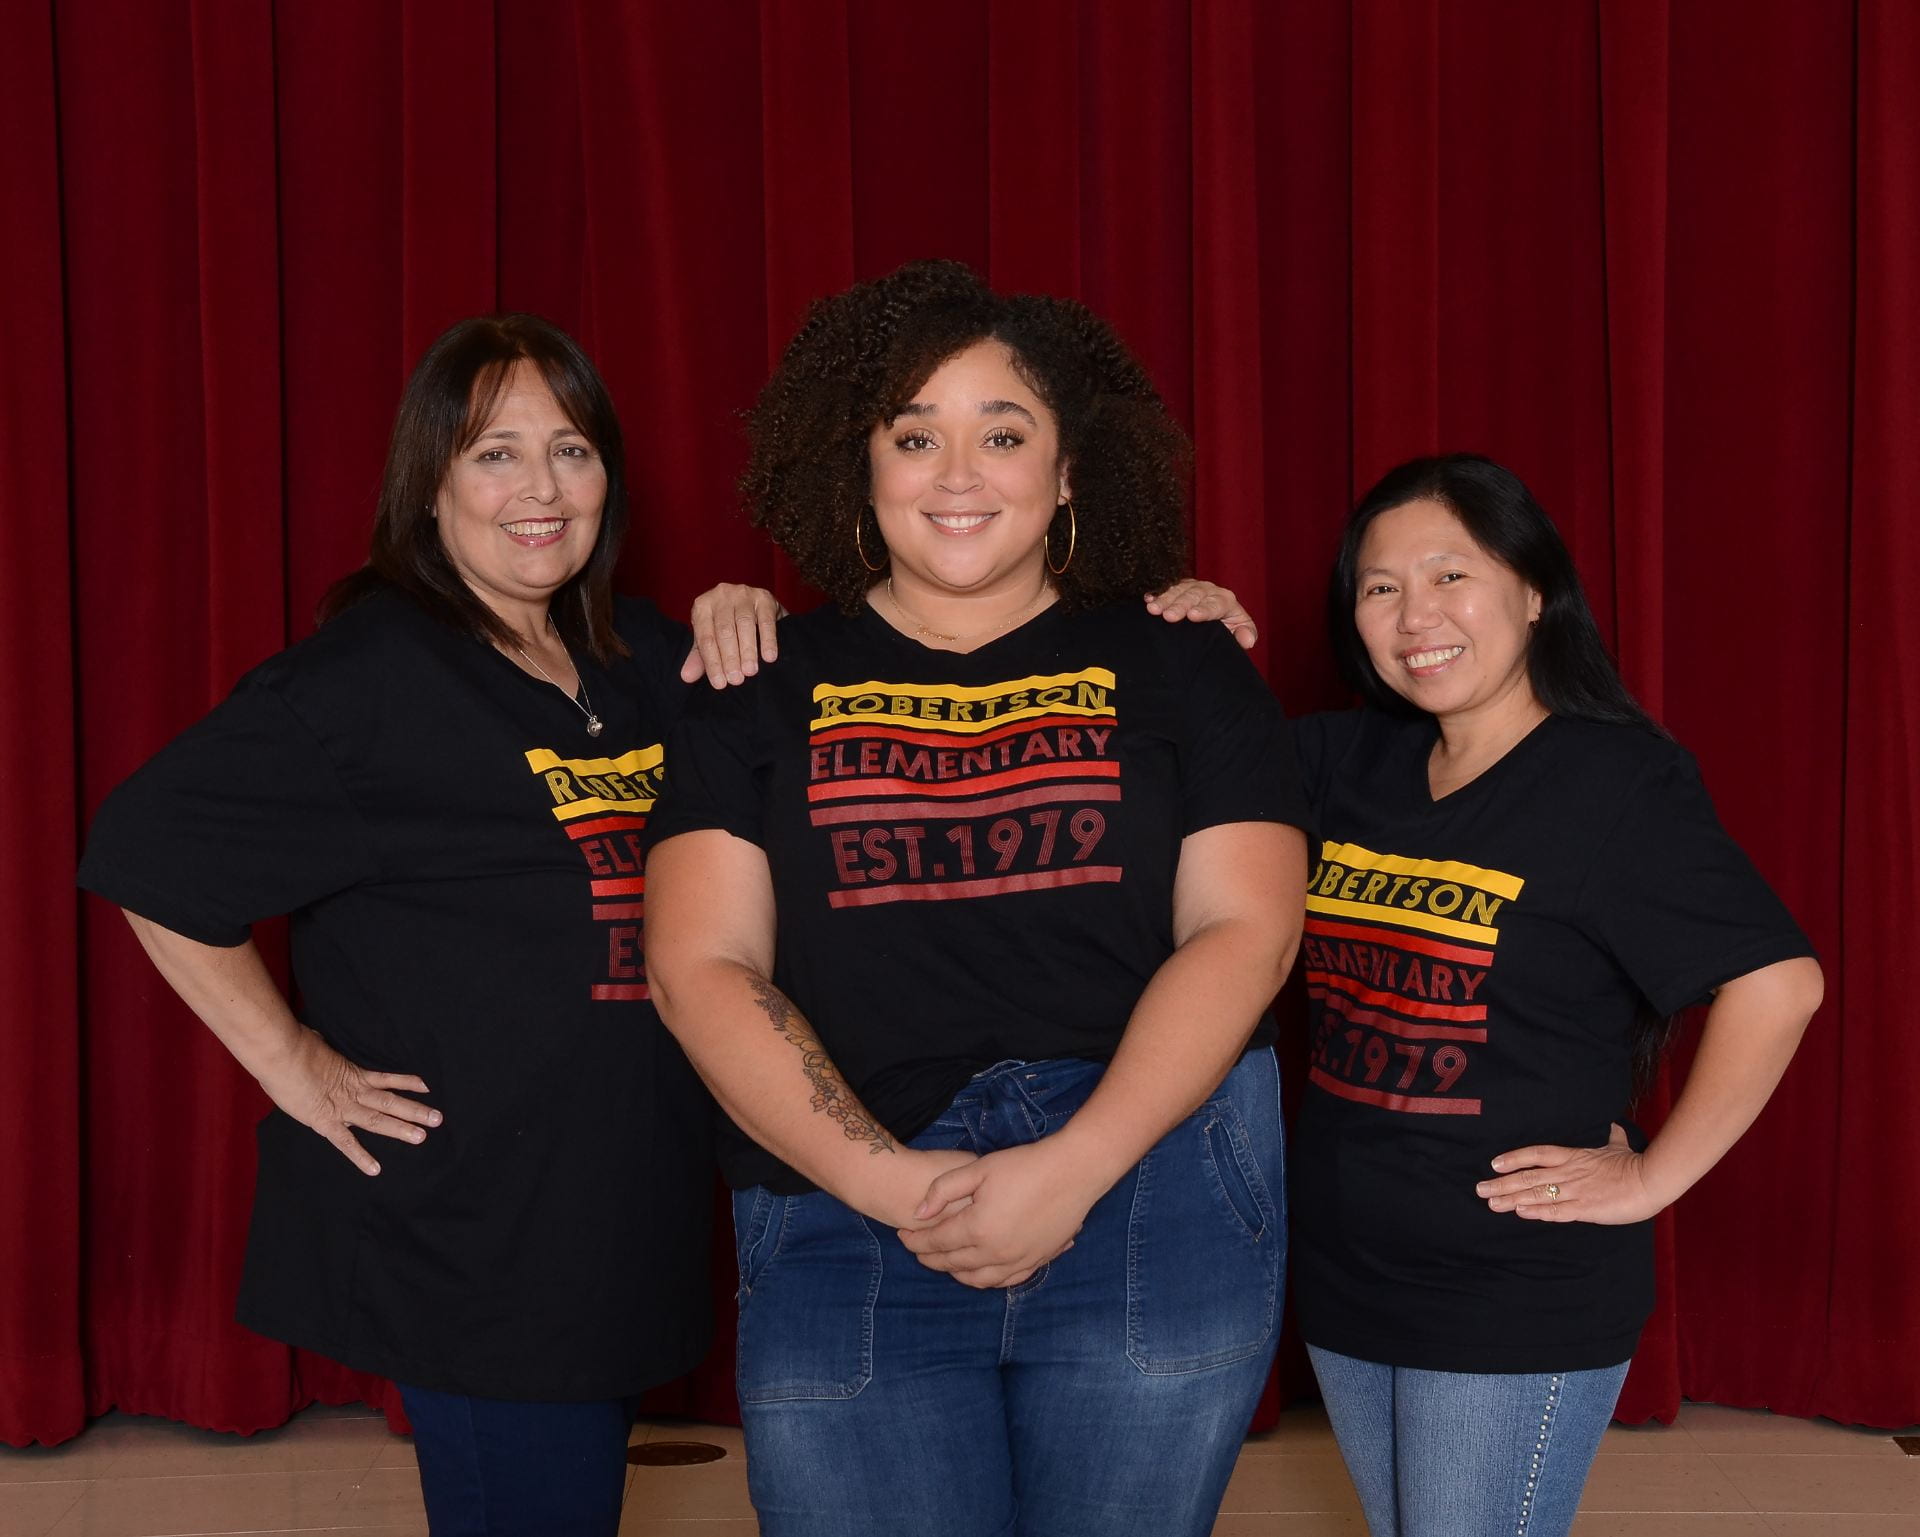 (3) First grade team teachers wearing school shirts, standing in front of a maroon stage curtain